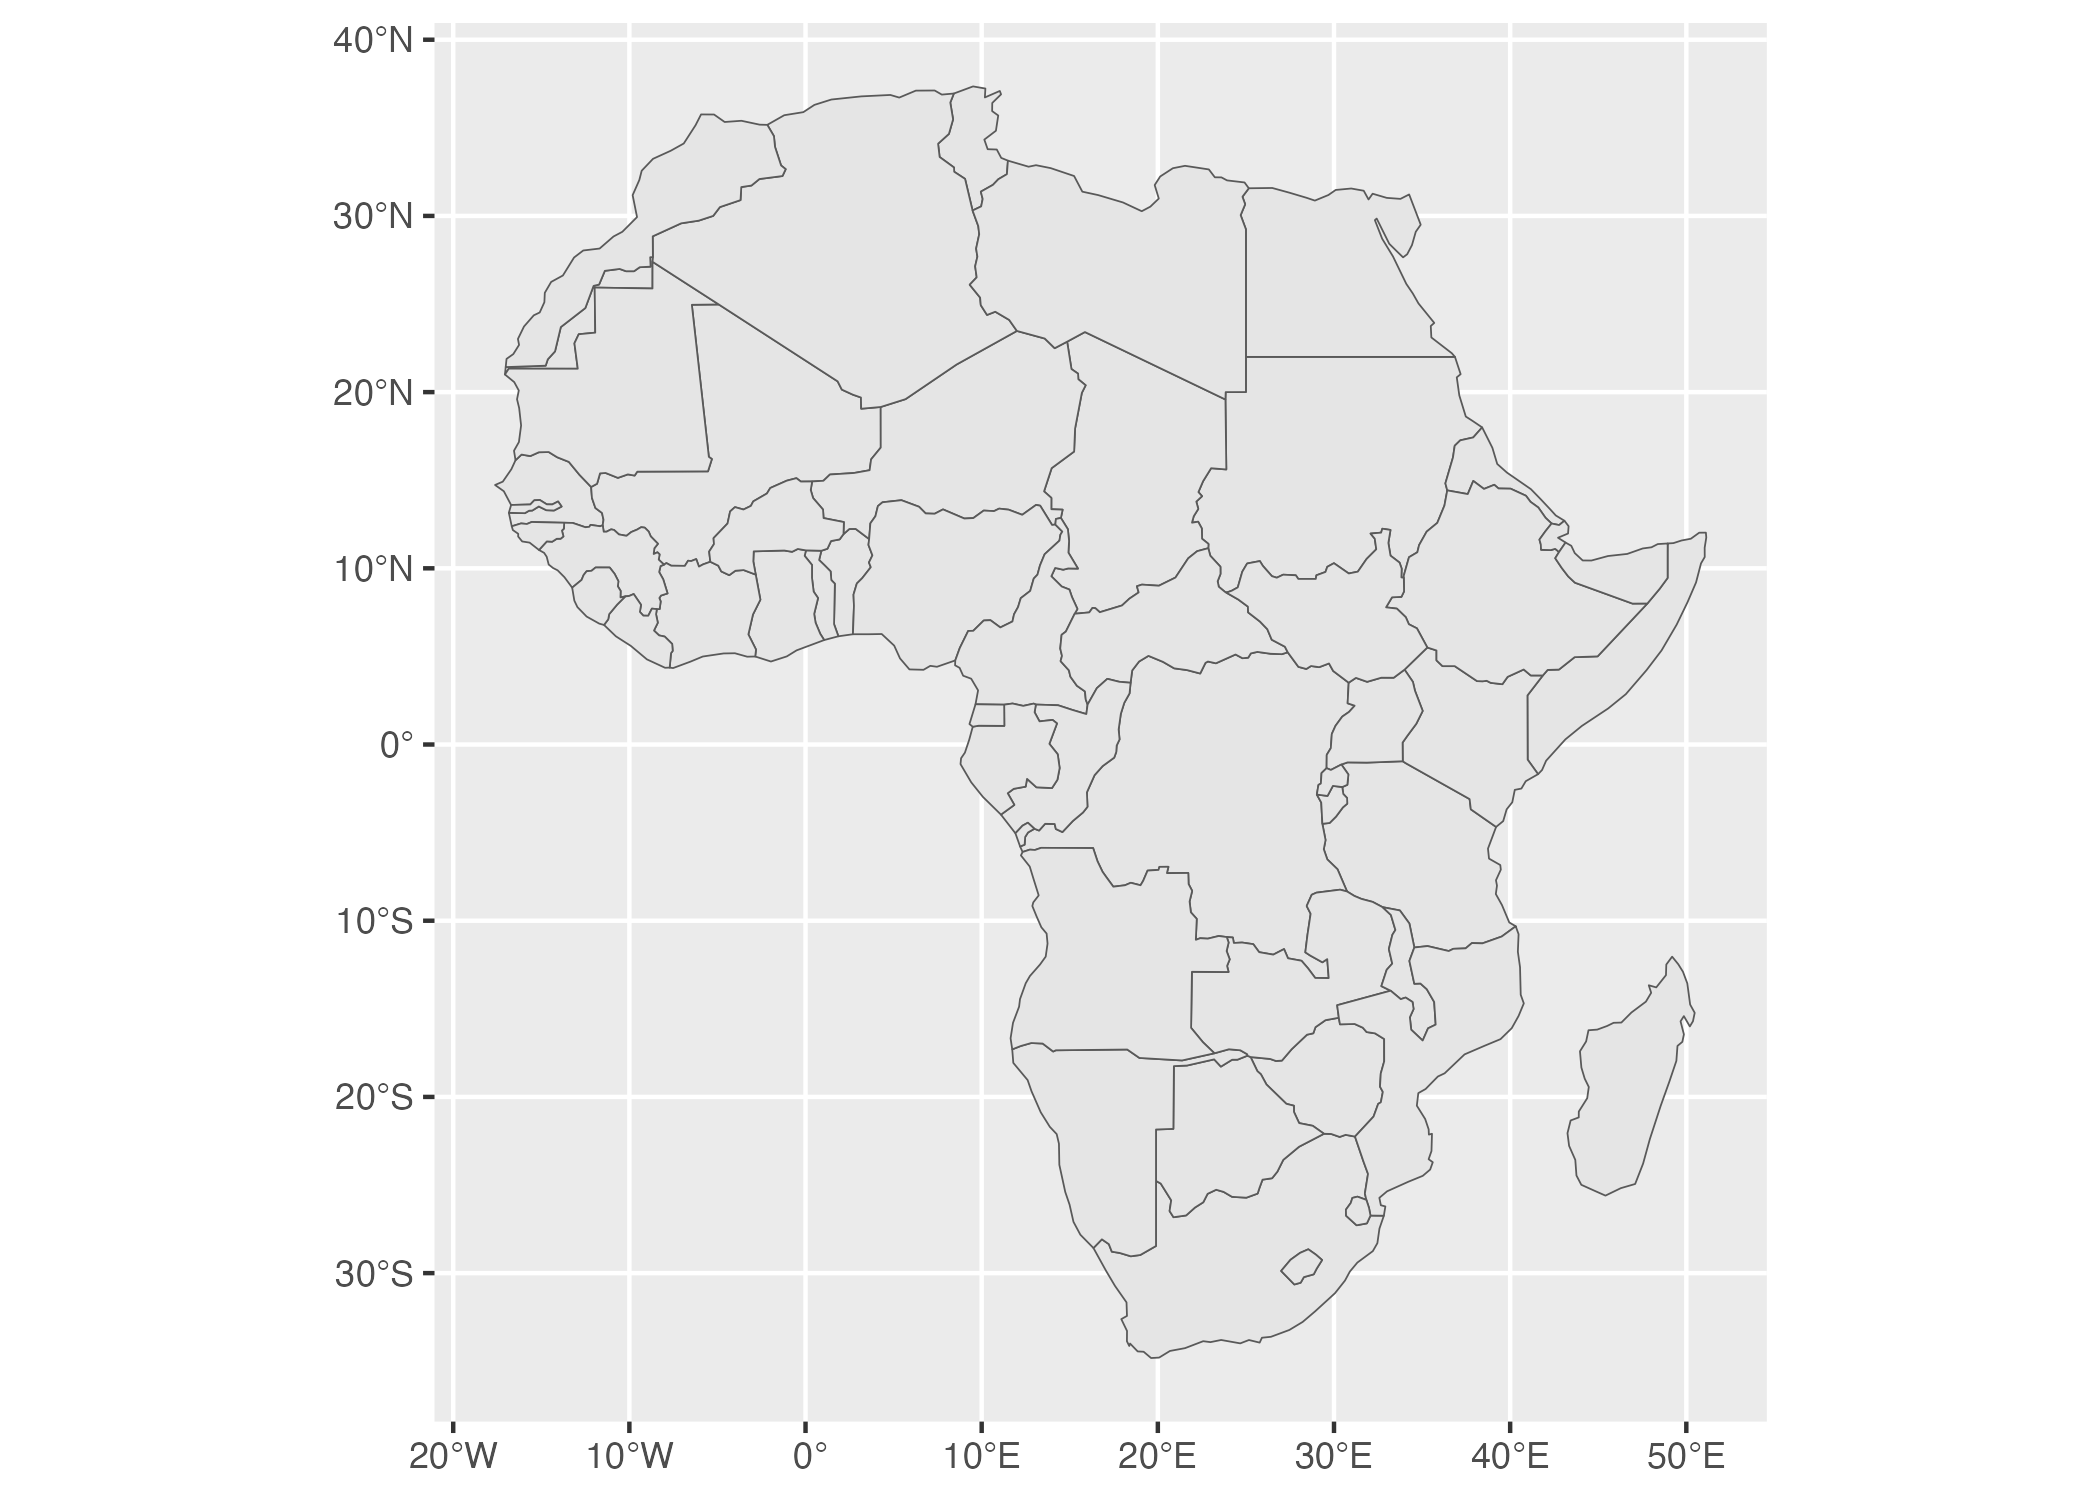 A map of Africa made with data from the rnaturalearth package